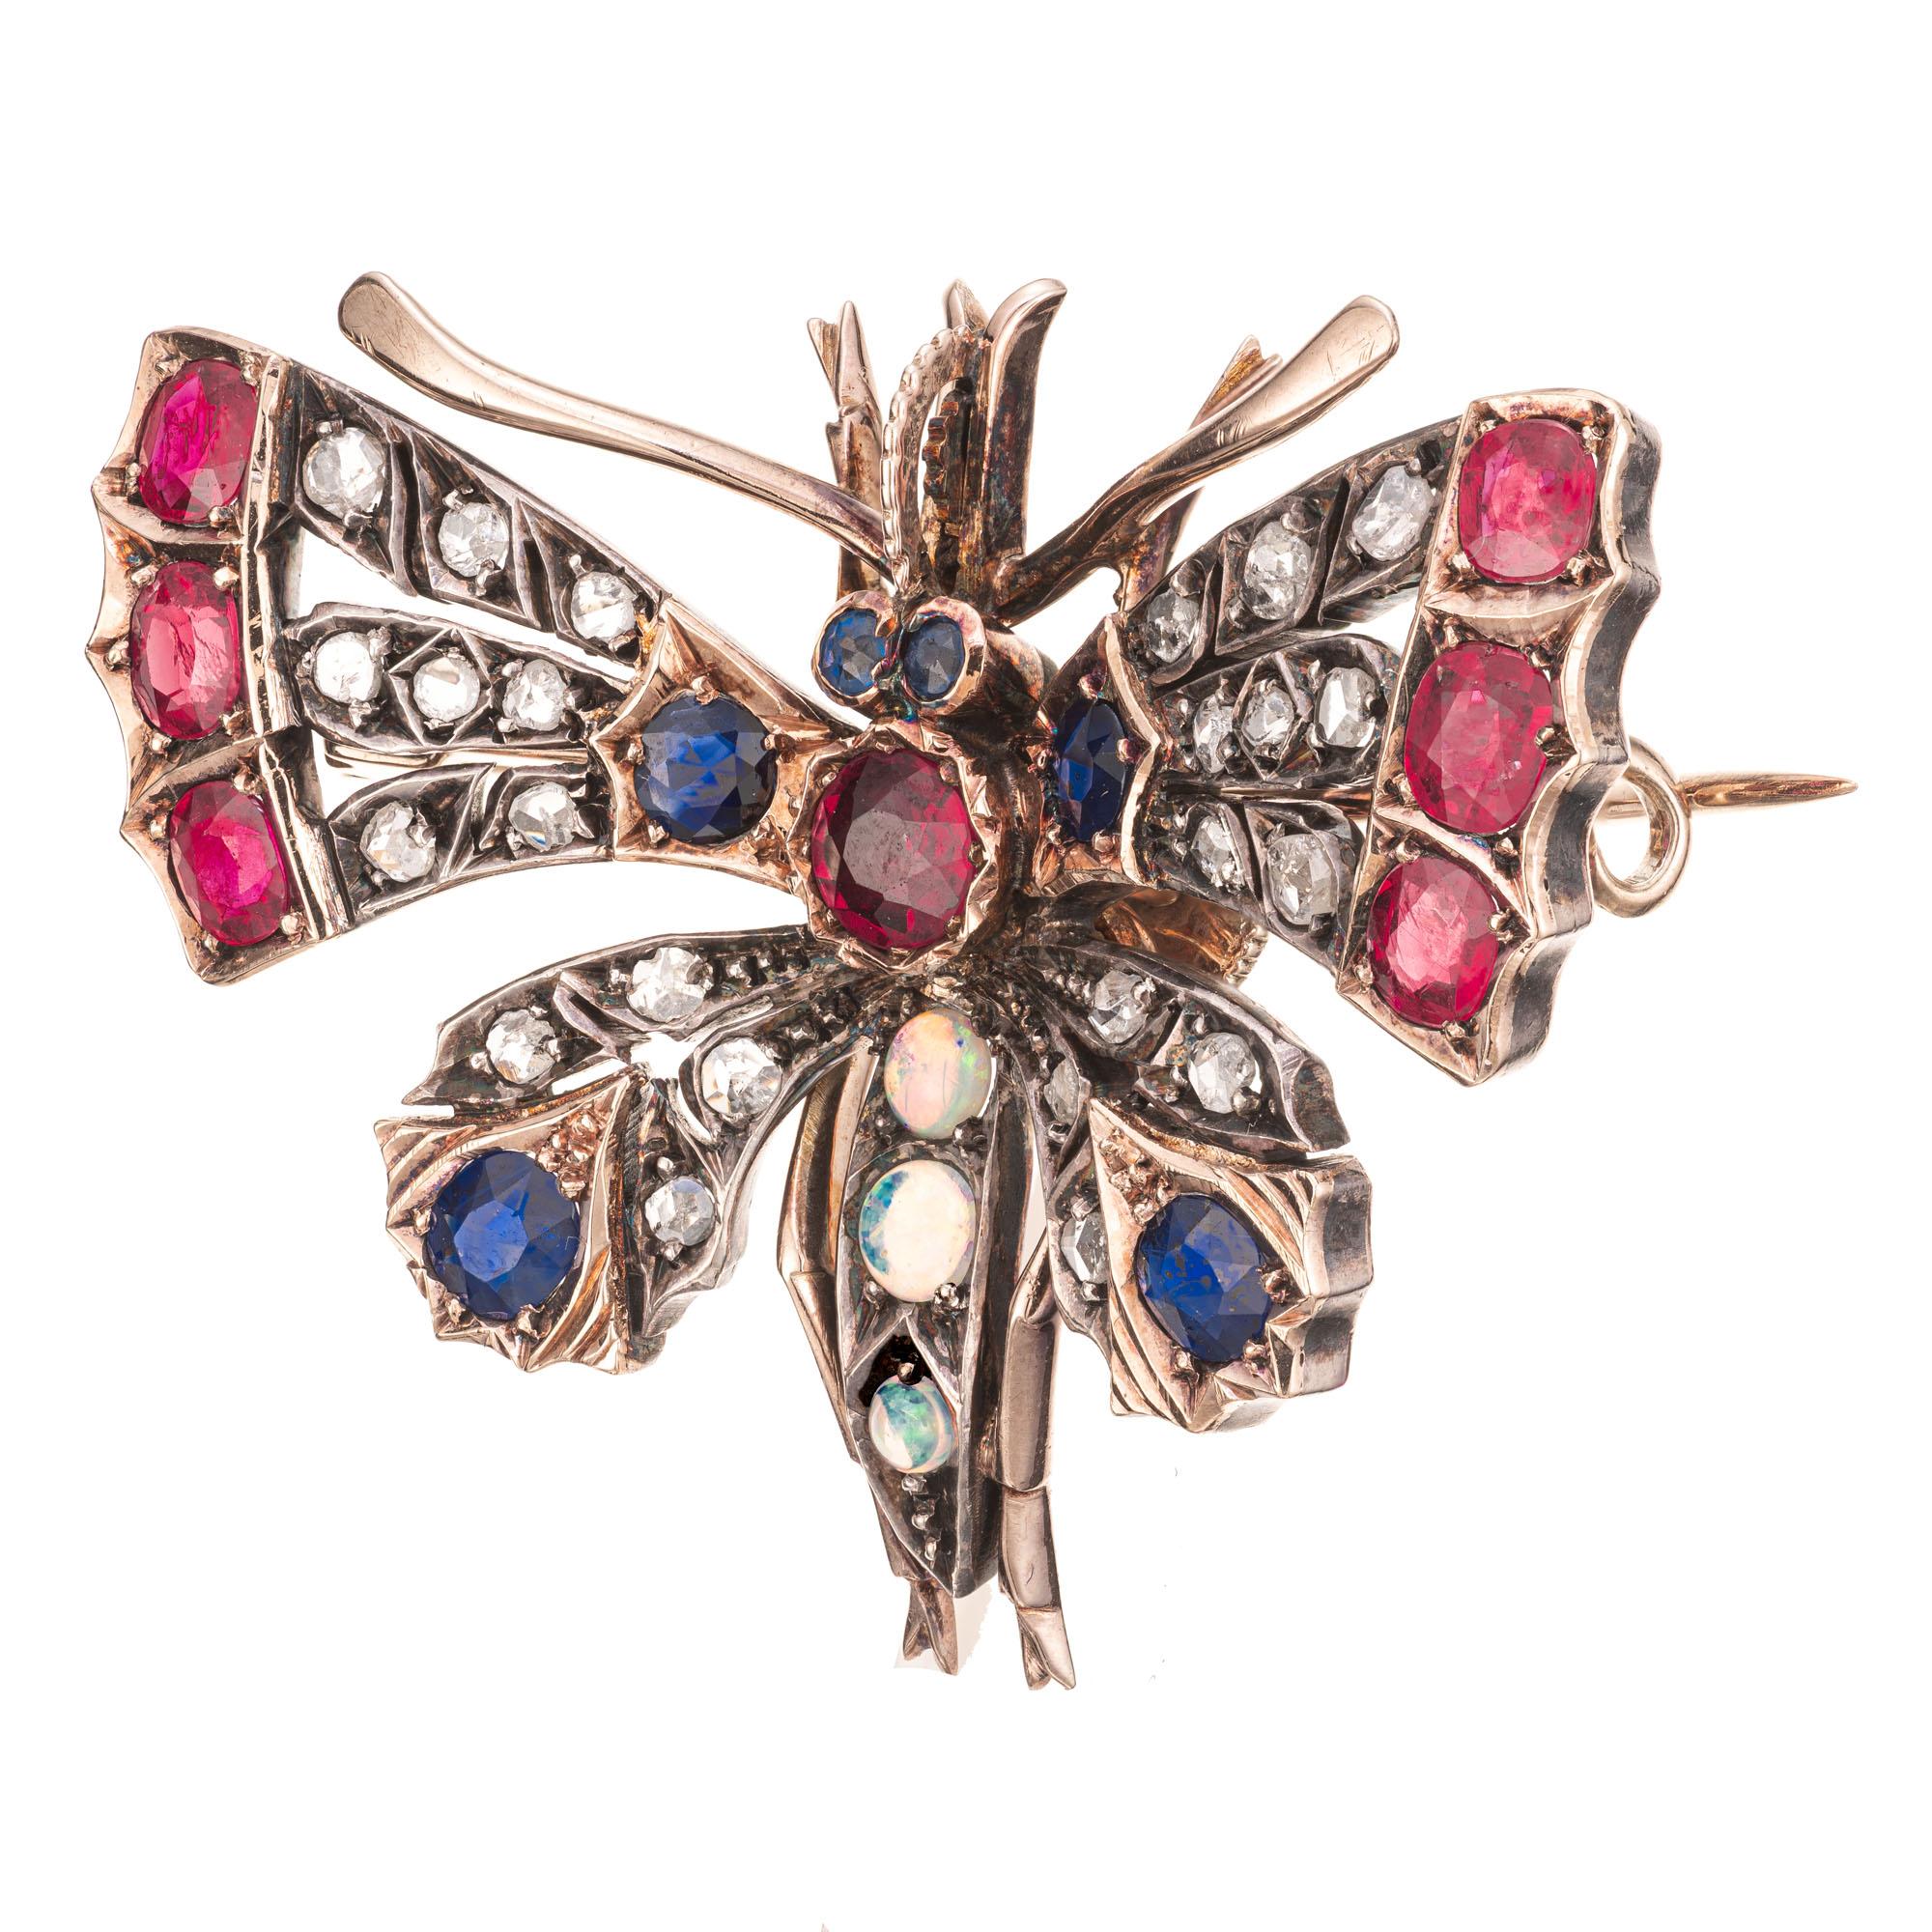 Mid 1880's Victorian moth Brooch. Set with rubies, diamonds, sapphires and opals in a 11-12 yellow gold and silver setting. Pin finding unscrews from the back. Tested 11k to 12k  gold and silver.  Diamonds and Opals are set in silver. 

6, 4.3mm